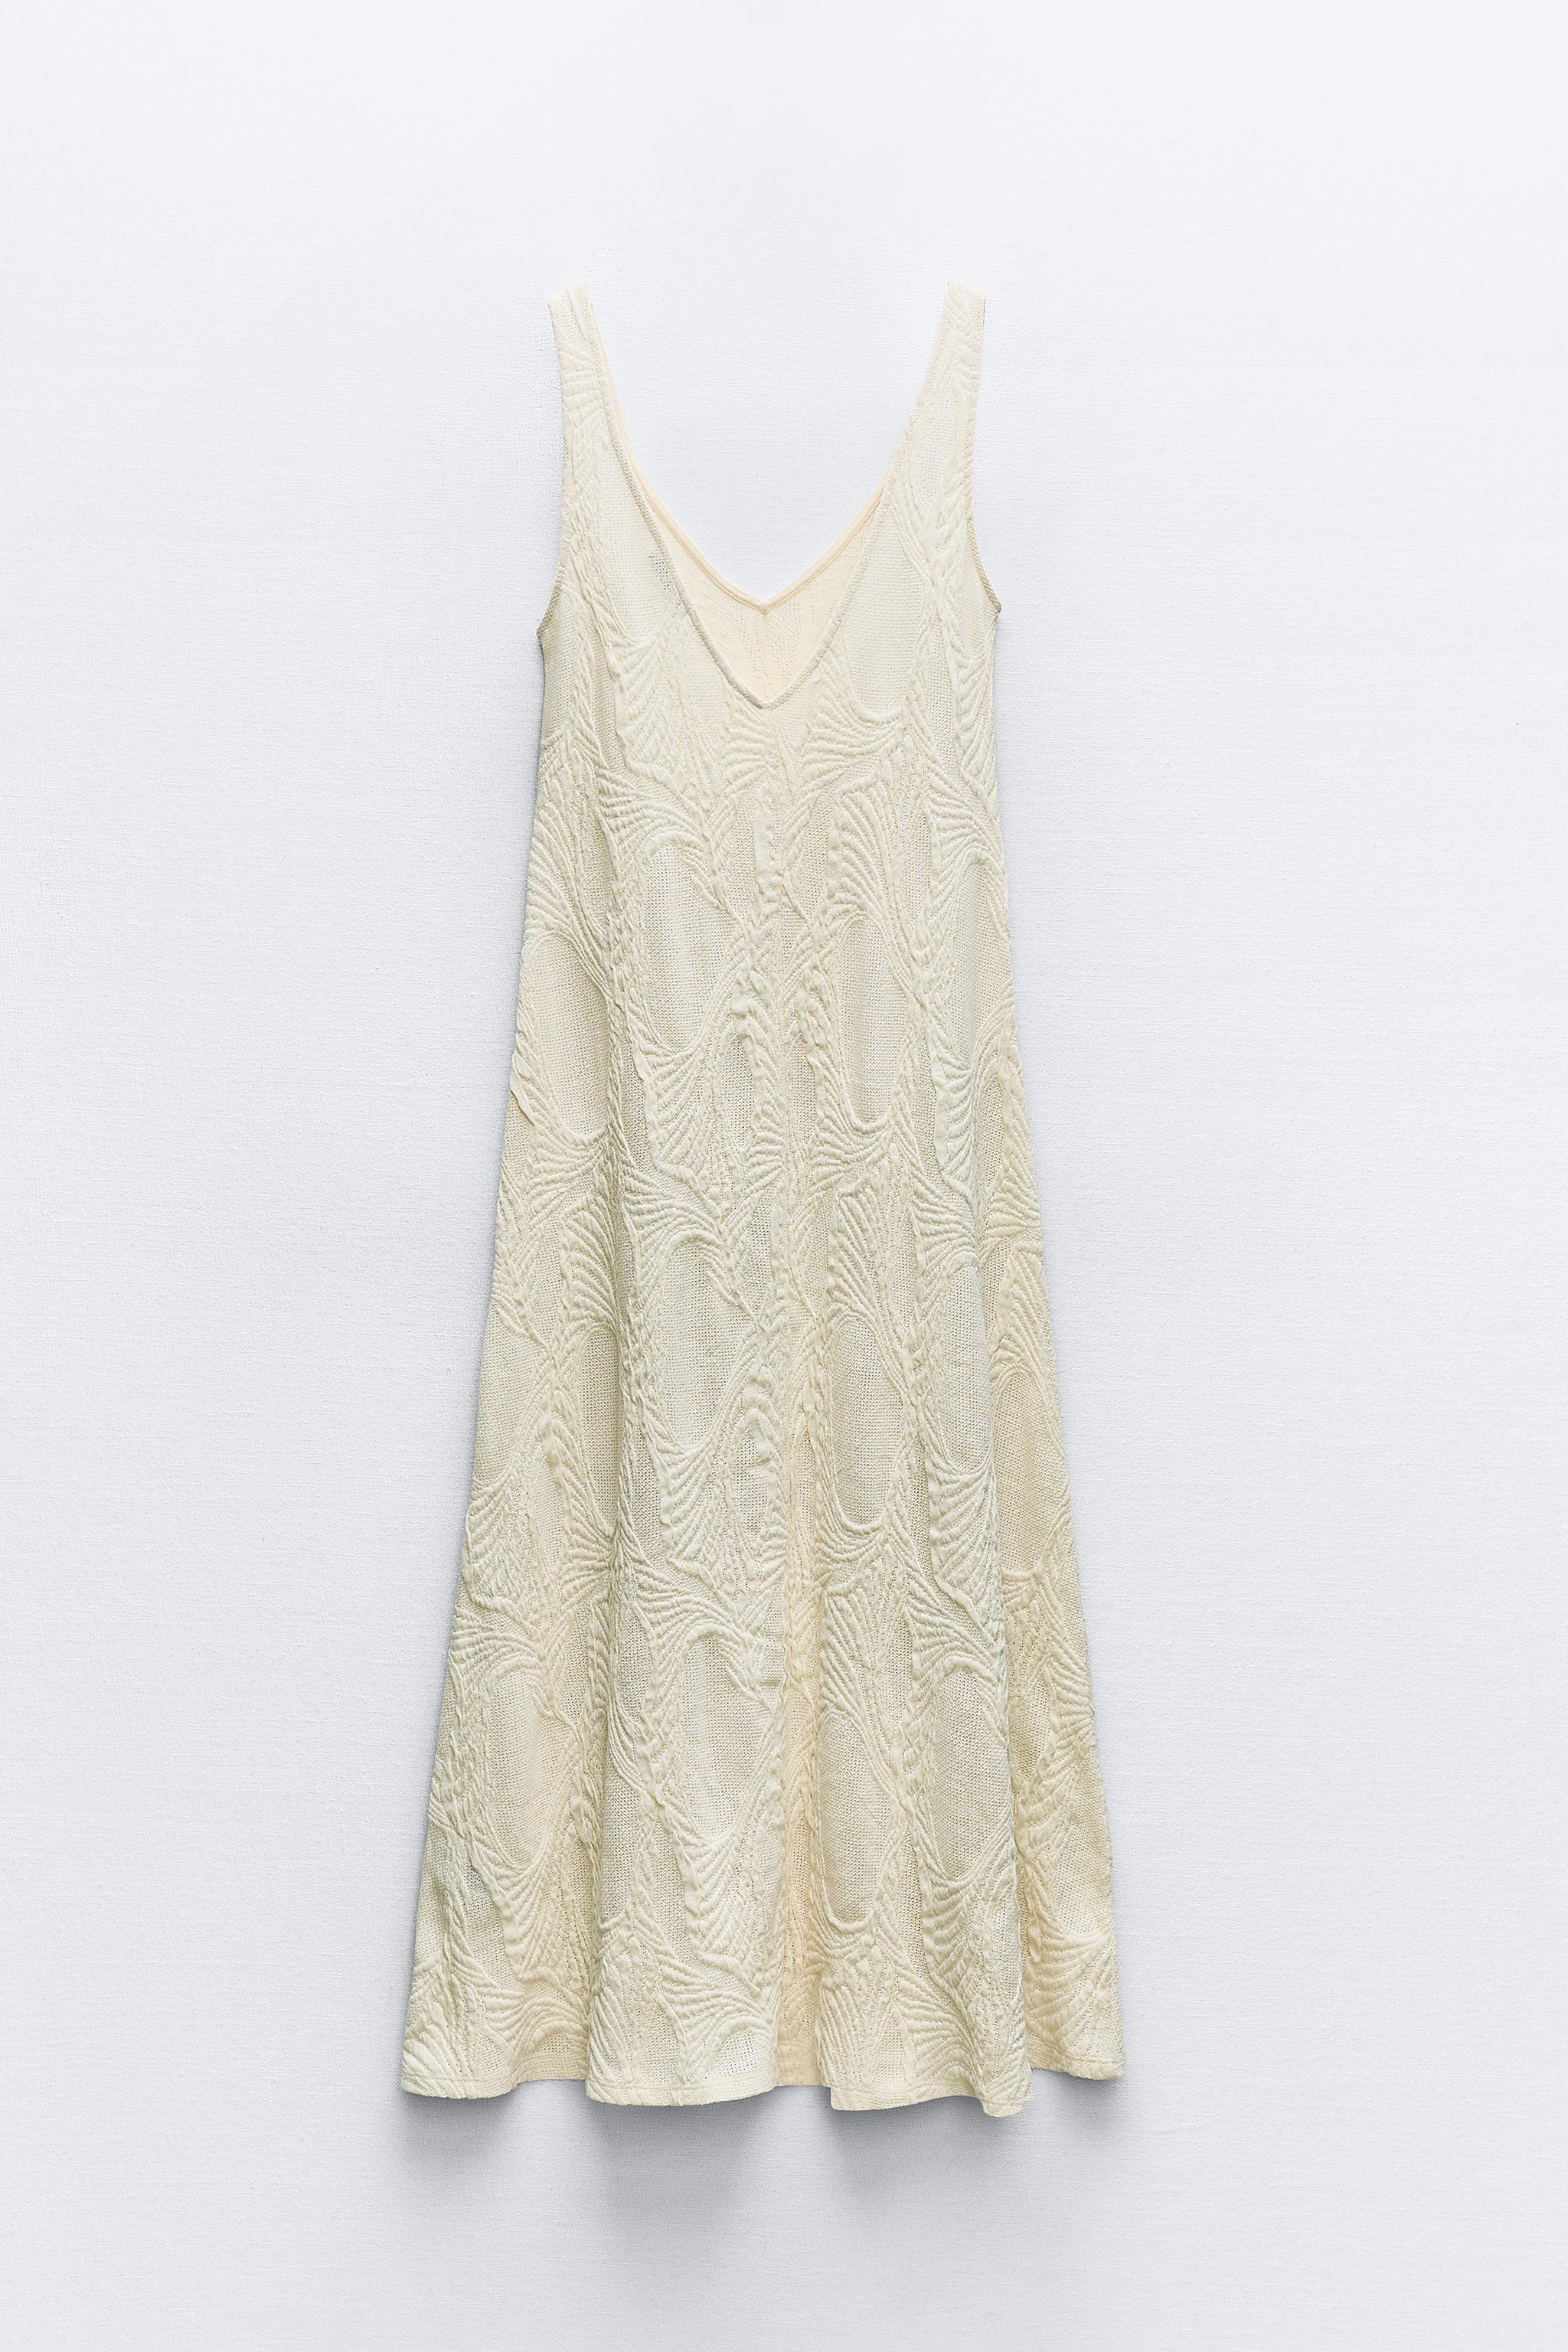 ZARA NEW WOMAN LONG SLIP DRESS WITH TOP - LIMITED EDITION XS-XL